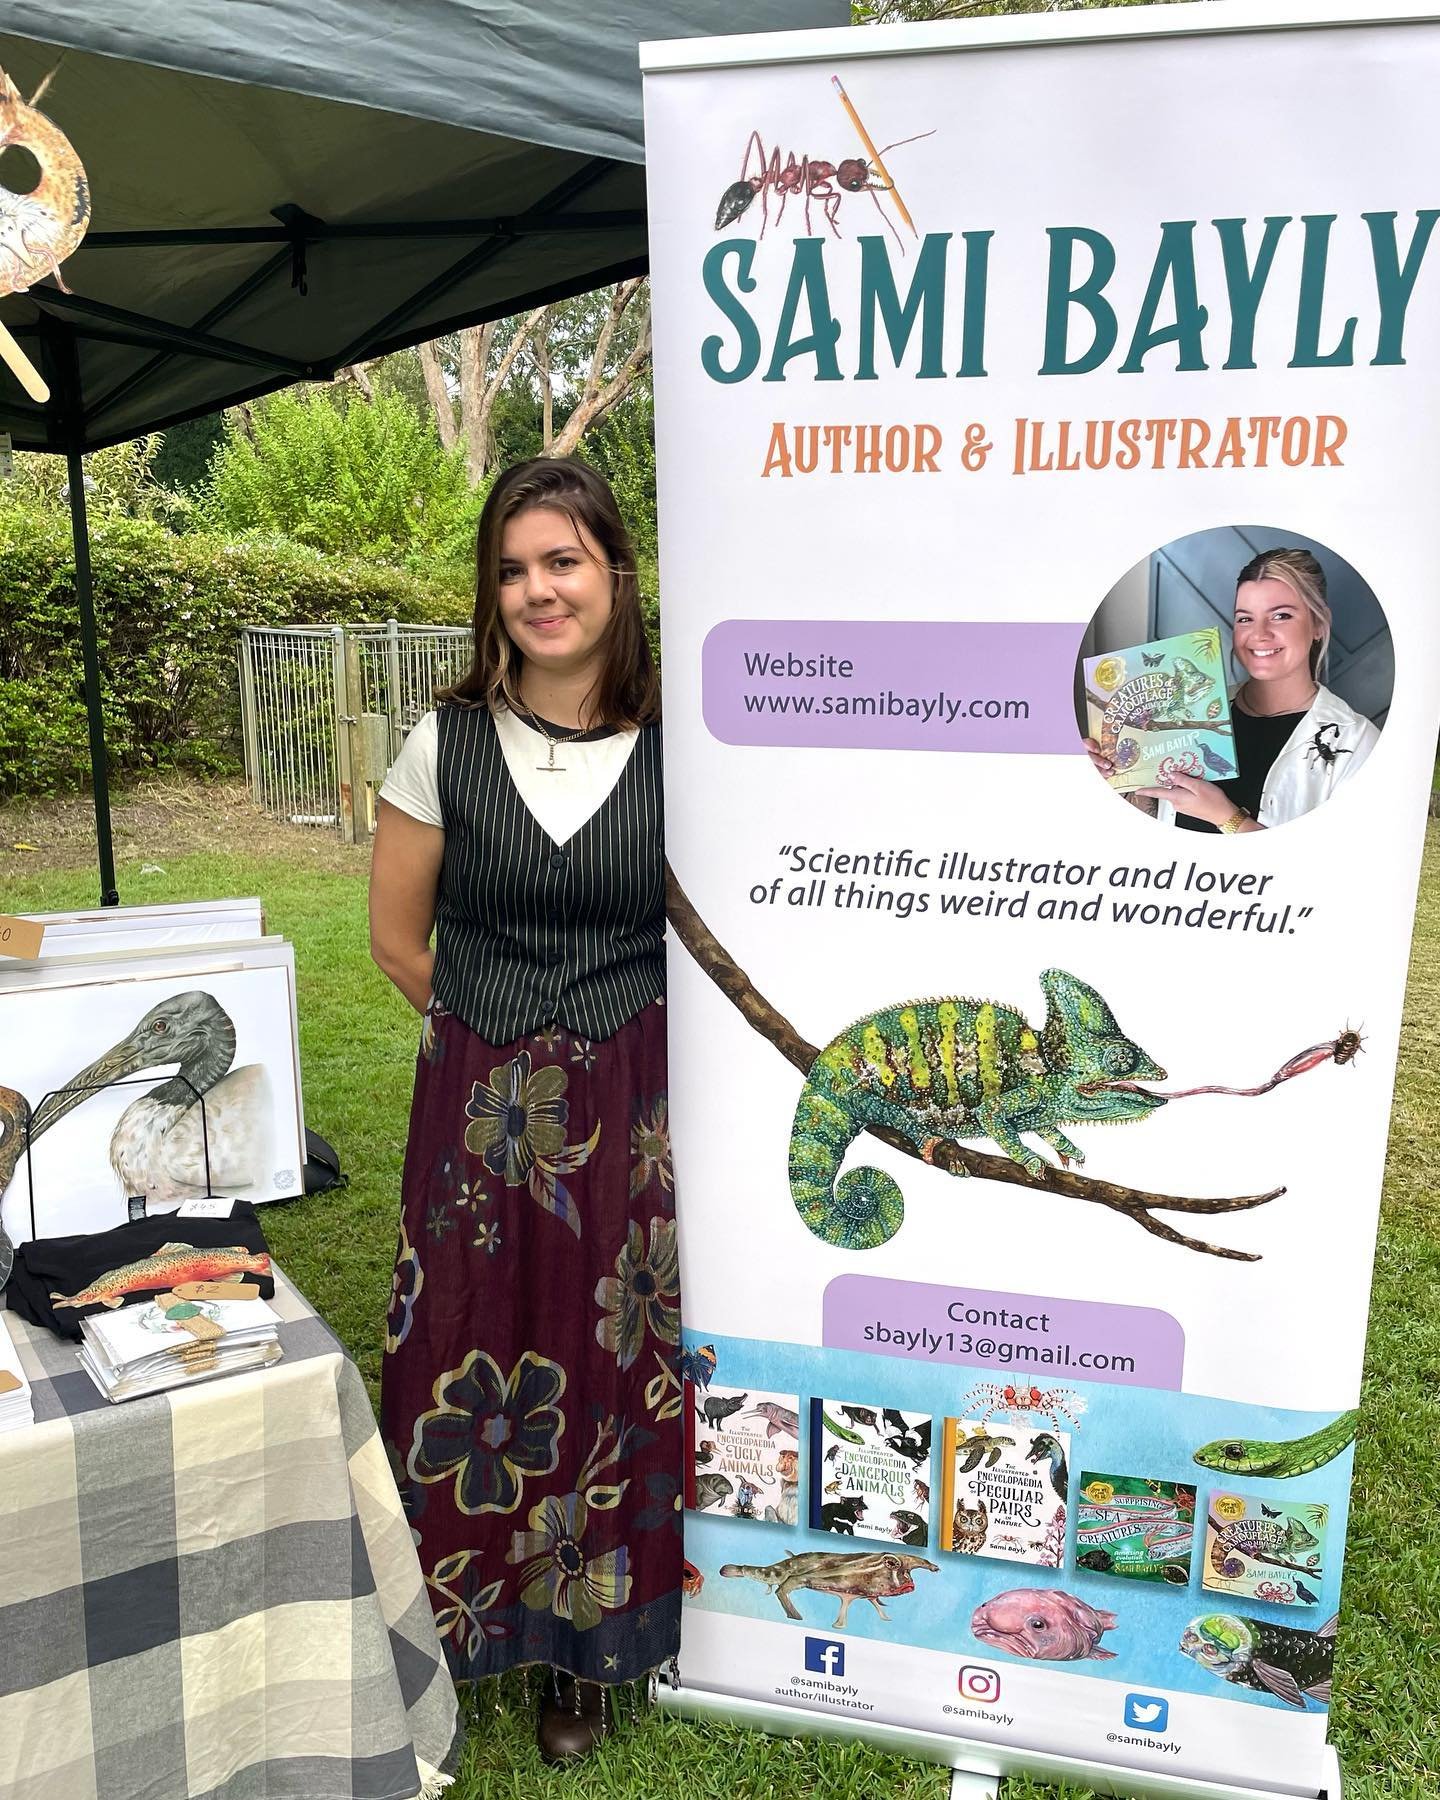 Come find me at the Teddy Bears Picnic held at @hunterbotanicgardens from 10am-2pm ☺️
-
-
-
-
#art #artwork #author #book #bookstagram #nature #kidsbook #animalart #animals #schoolholidays